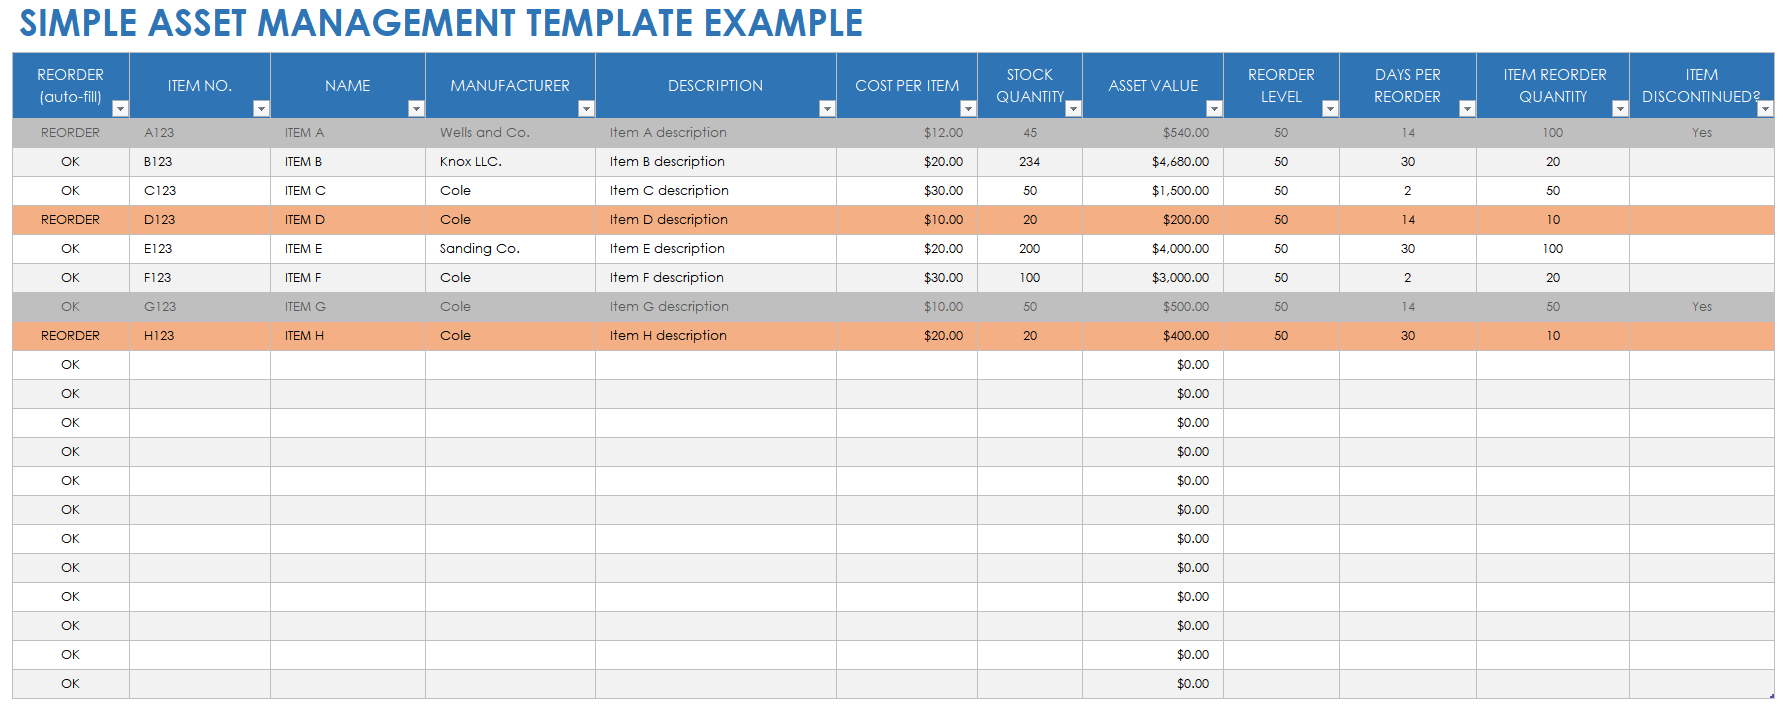 Simple Asset Management Template Example